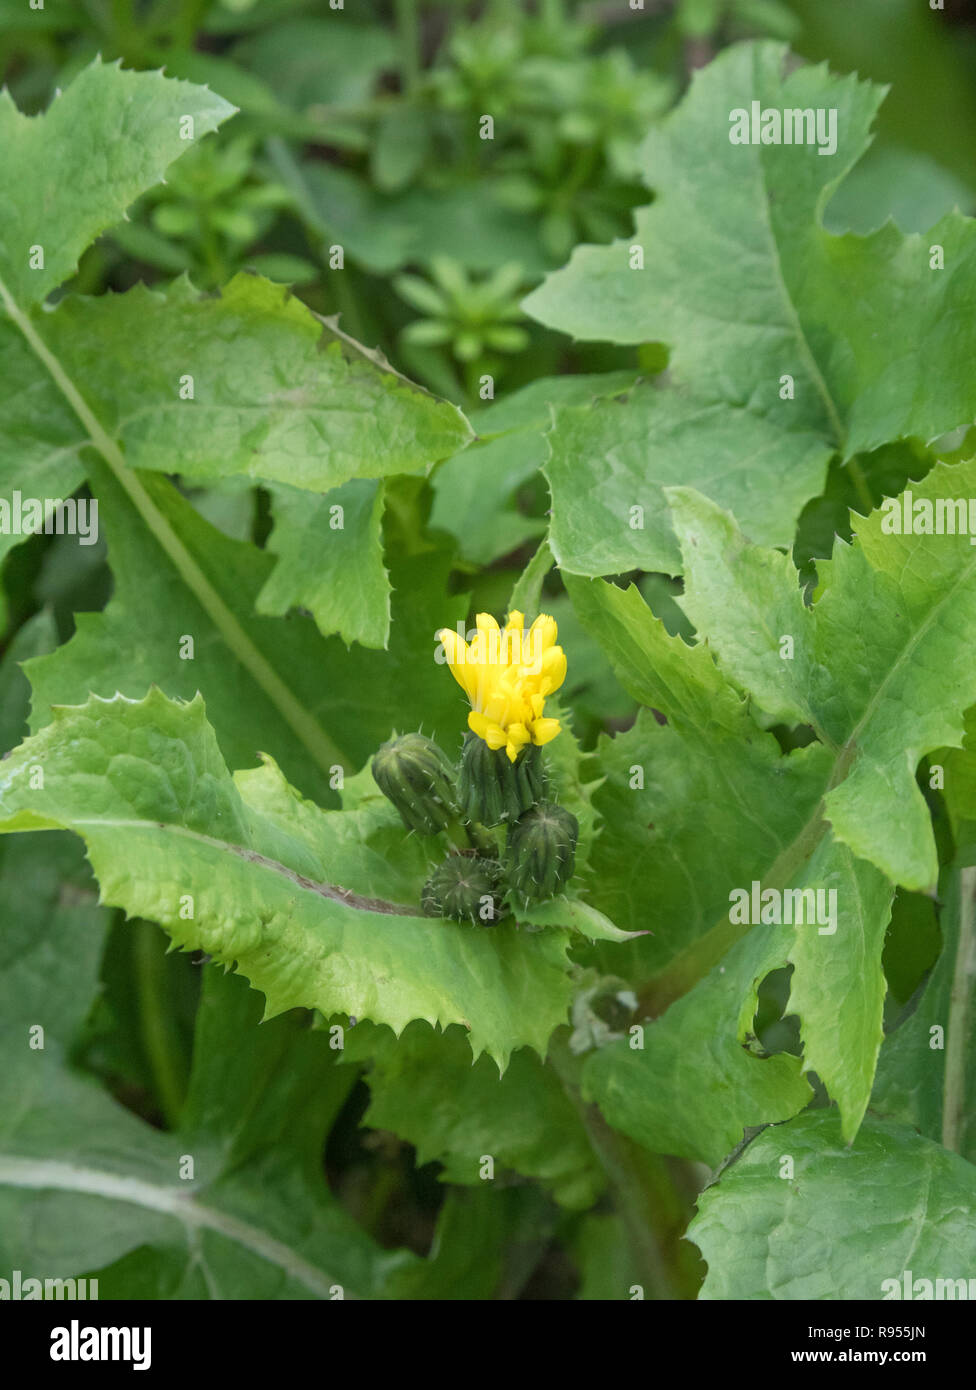 Flowering tops of Smooth Sow-thistle / Sonchus oleraceus - the leaves of which are an edible foraged wild green. Foraging & dining on the wild concept Stock Photo